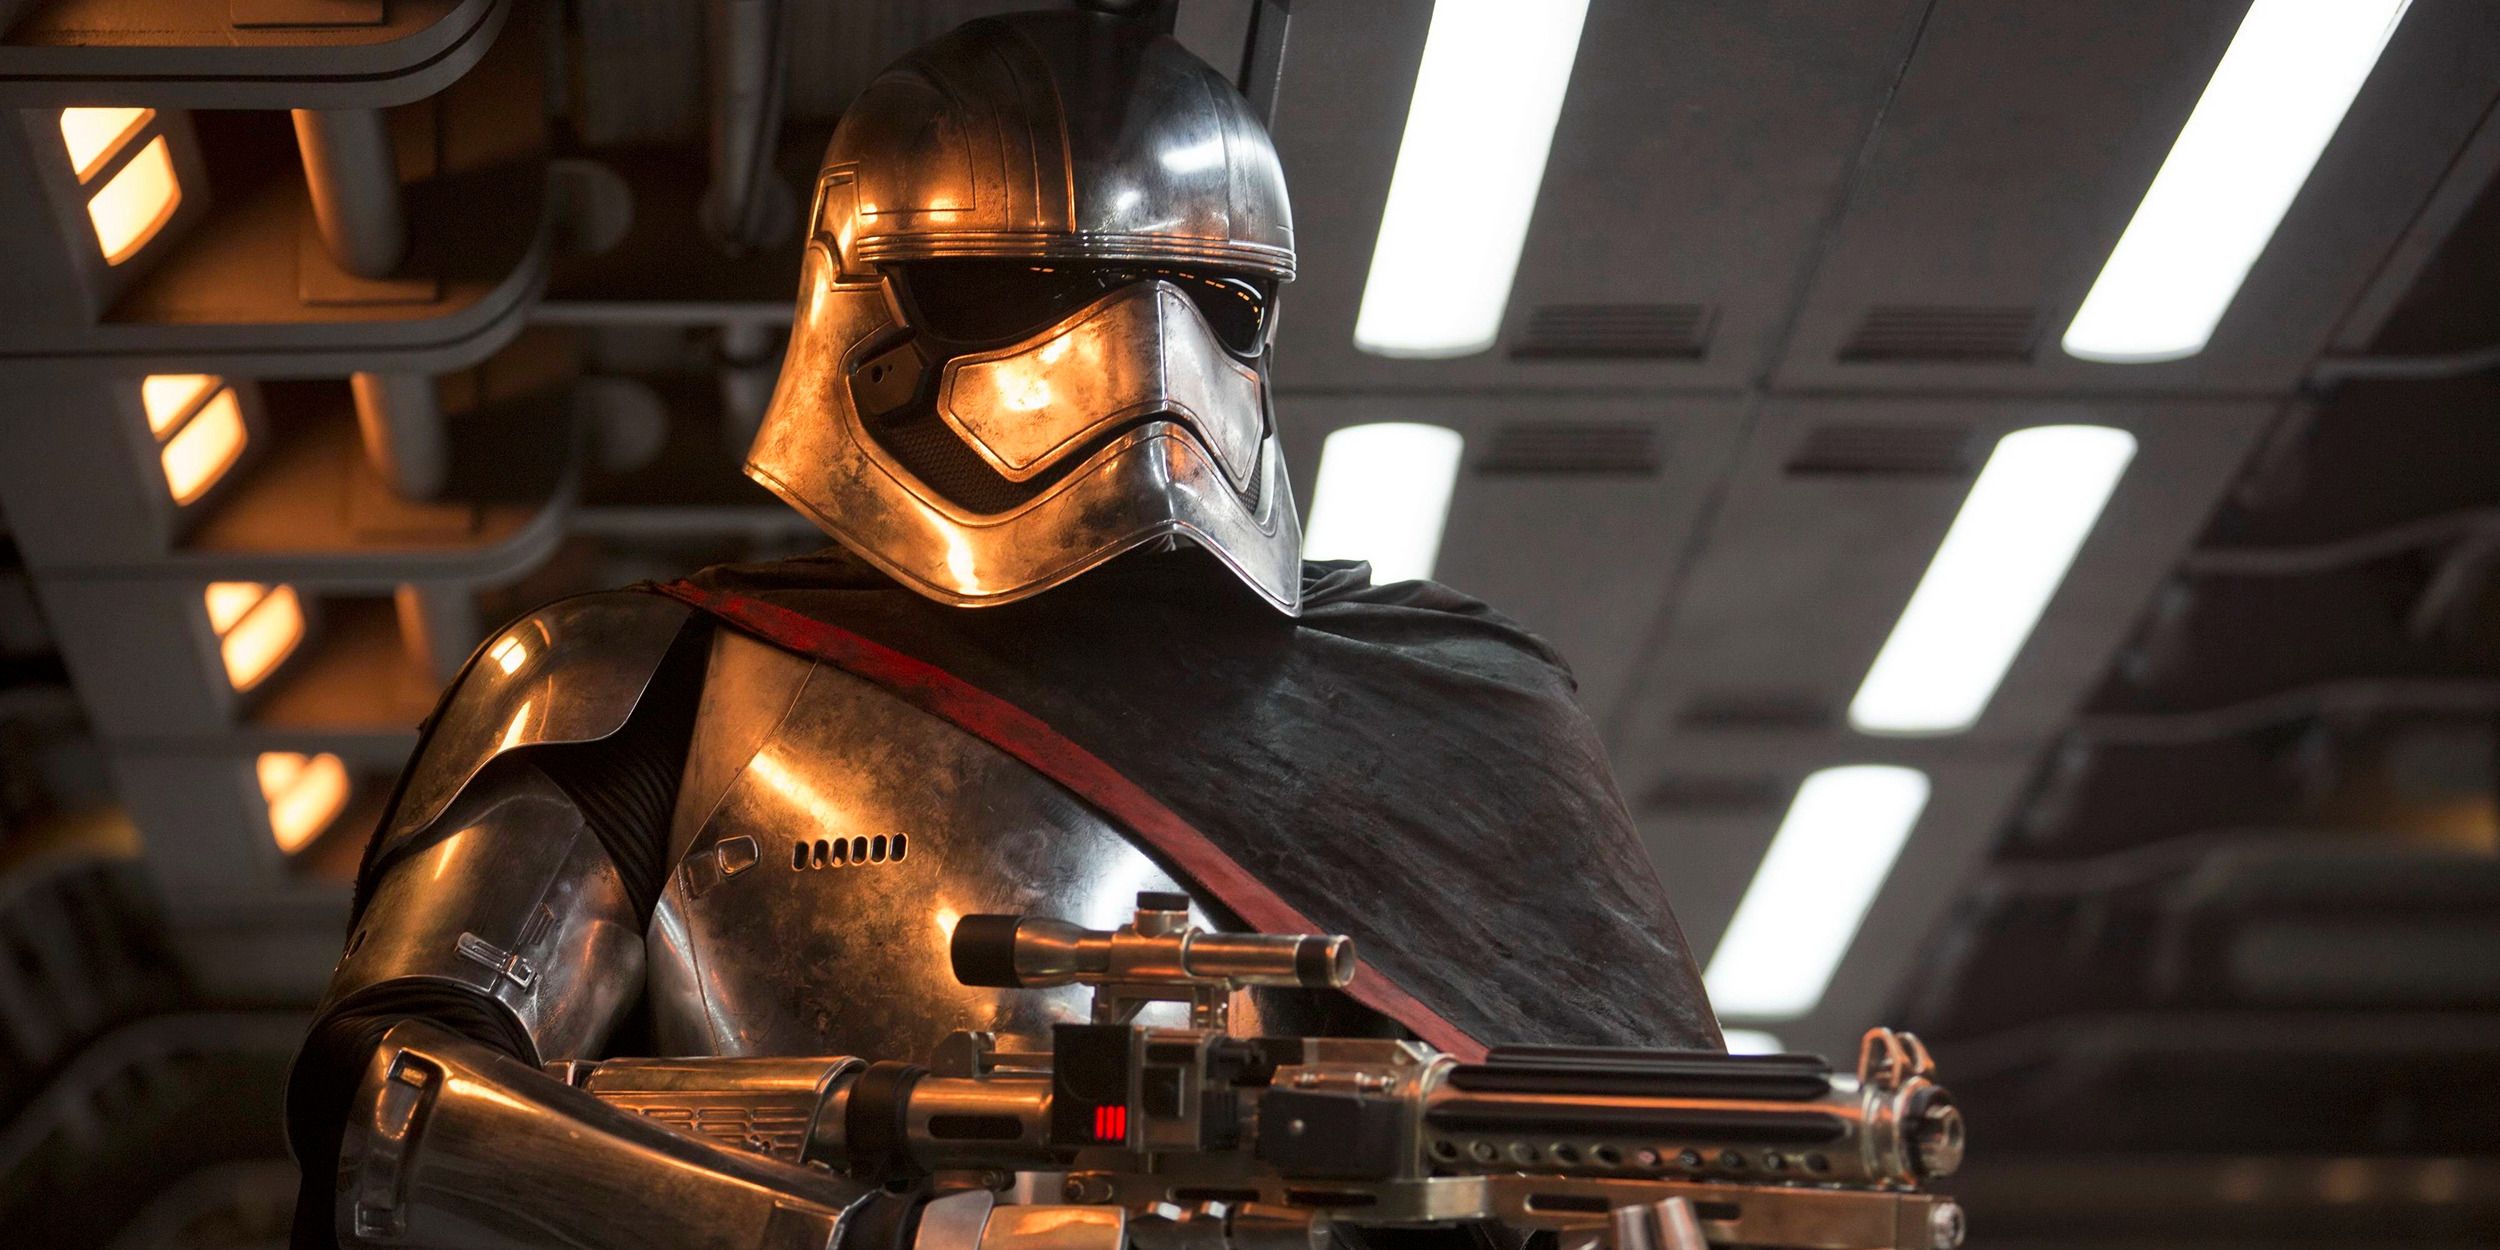 Captain Phasma with a blaster in 'Star Wars Episode VII - The Force Awakens'